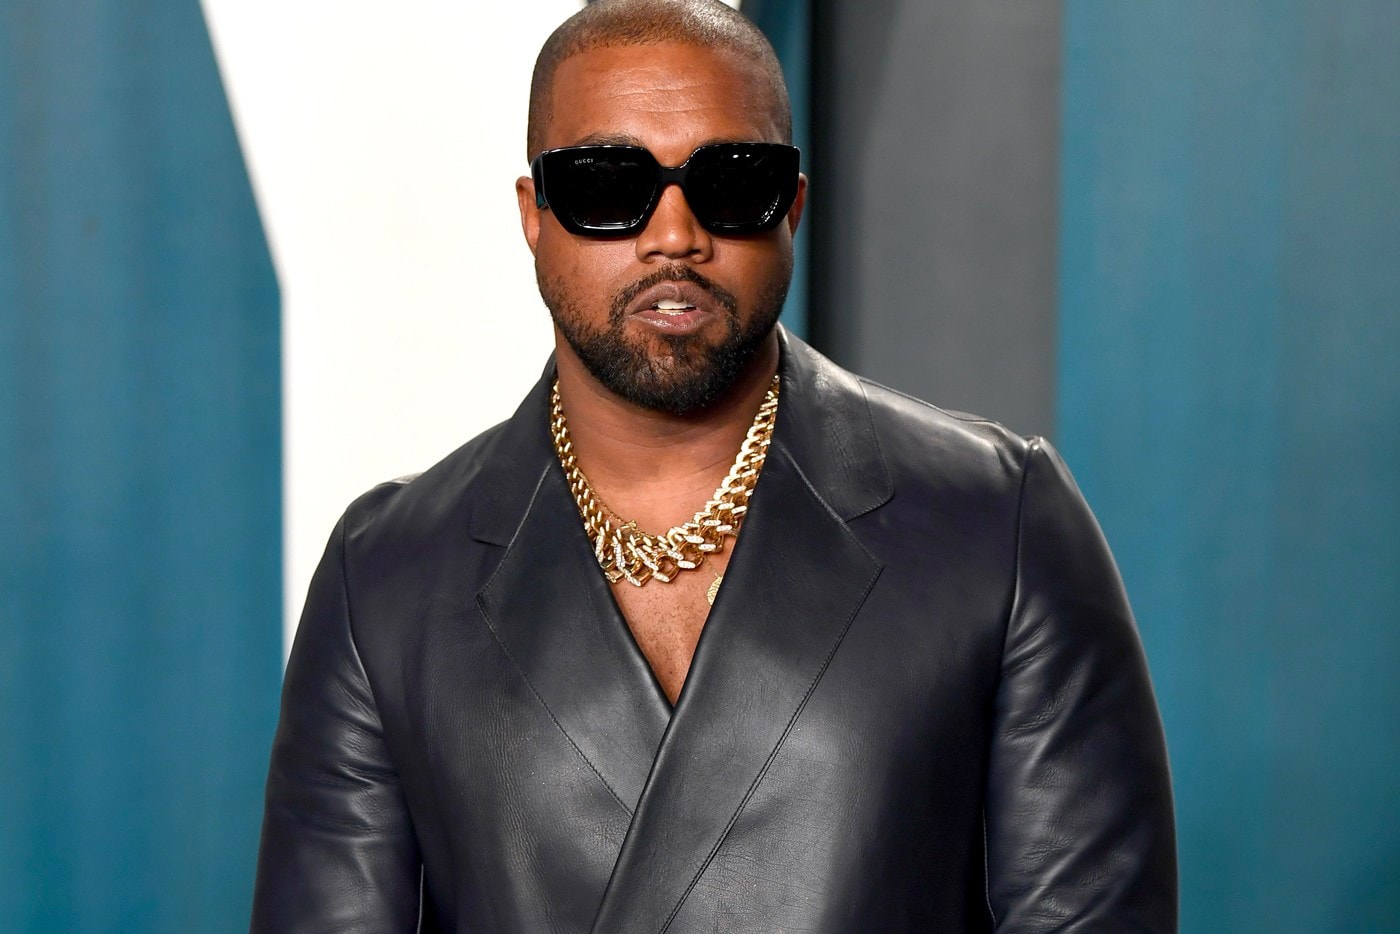 Kanye West Talks American Manufacturing and Gap x YEEZY cody enterprise wyoming labor force made in usa matt george 